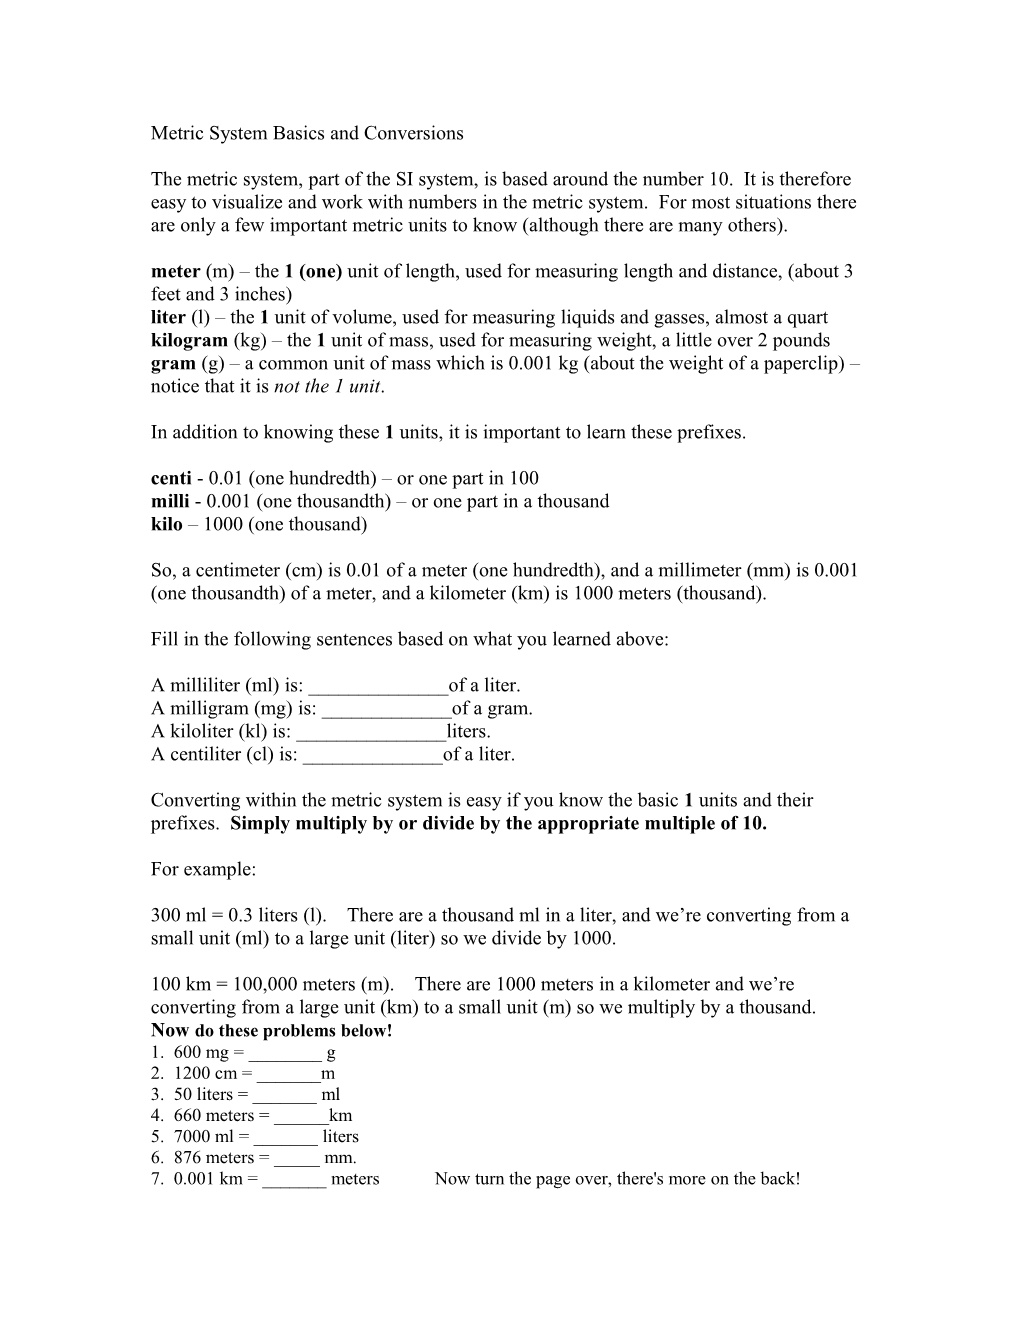 Basic Metric System and Conversions